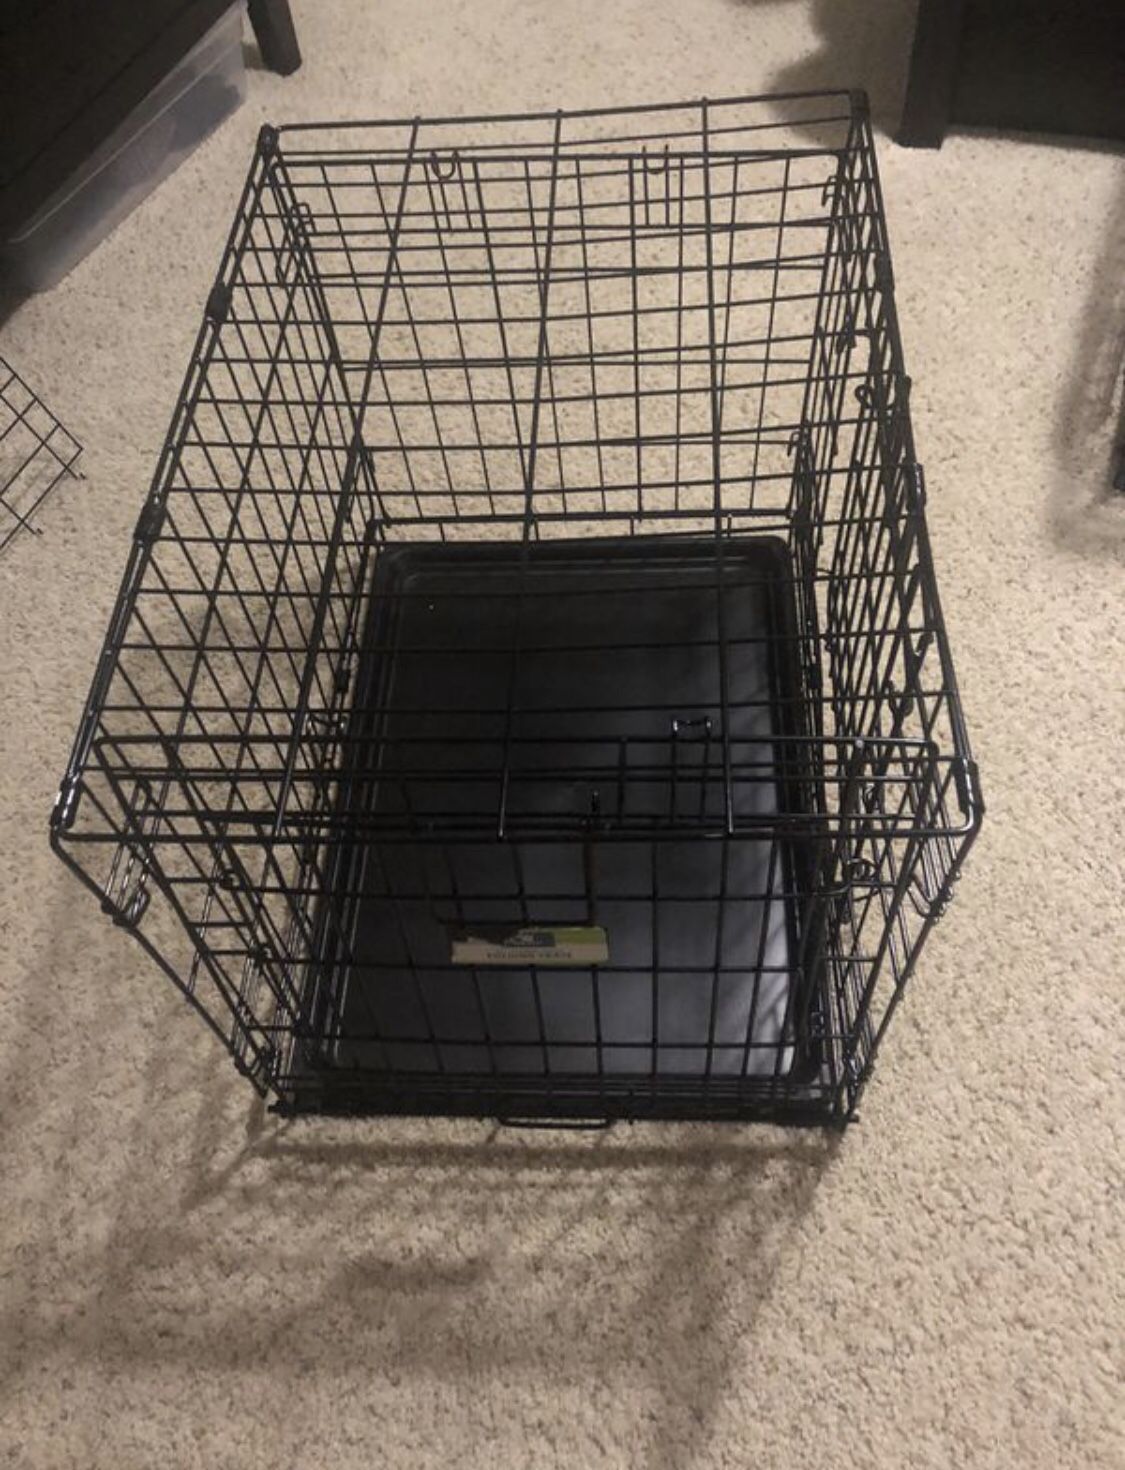 Top paw dog/puppy crate